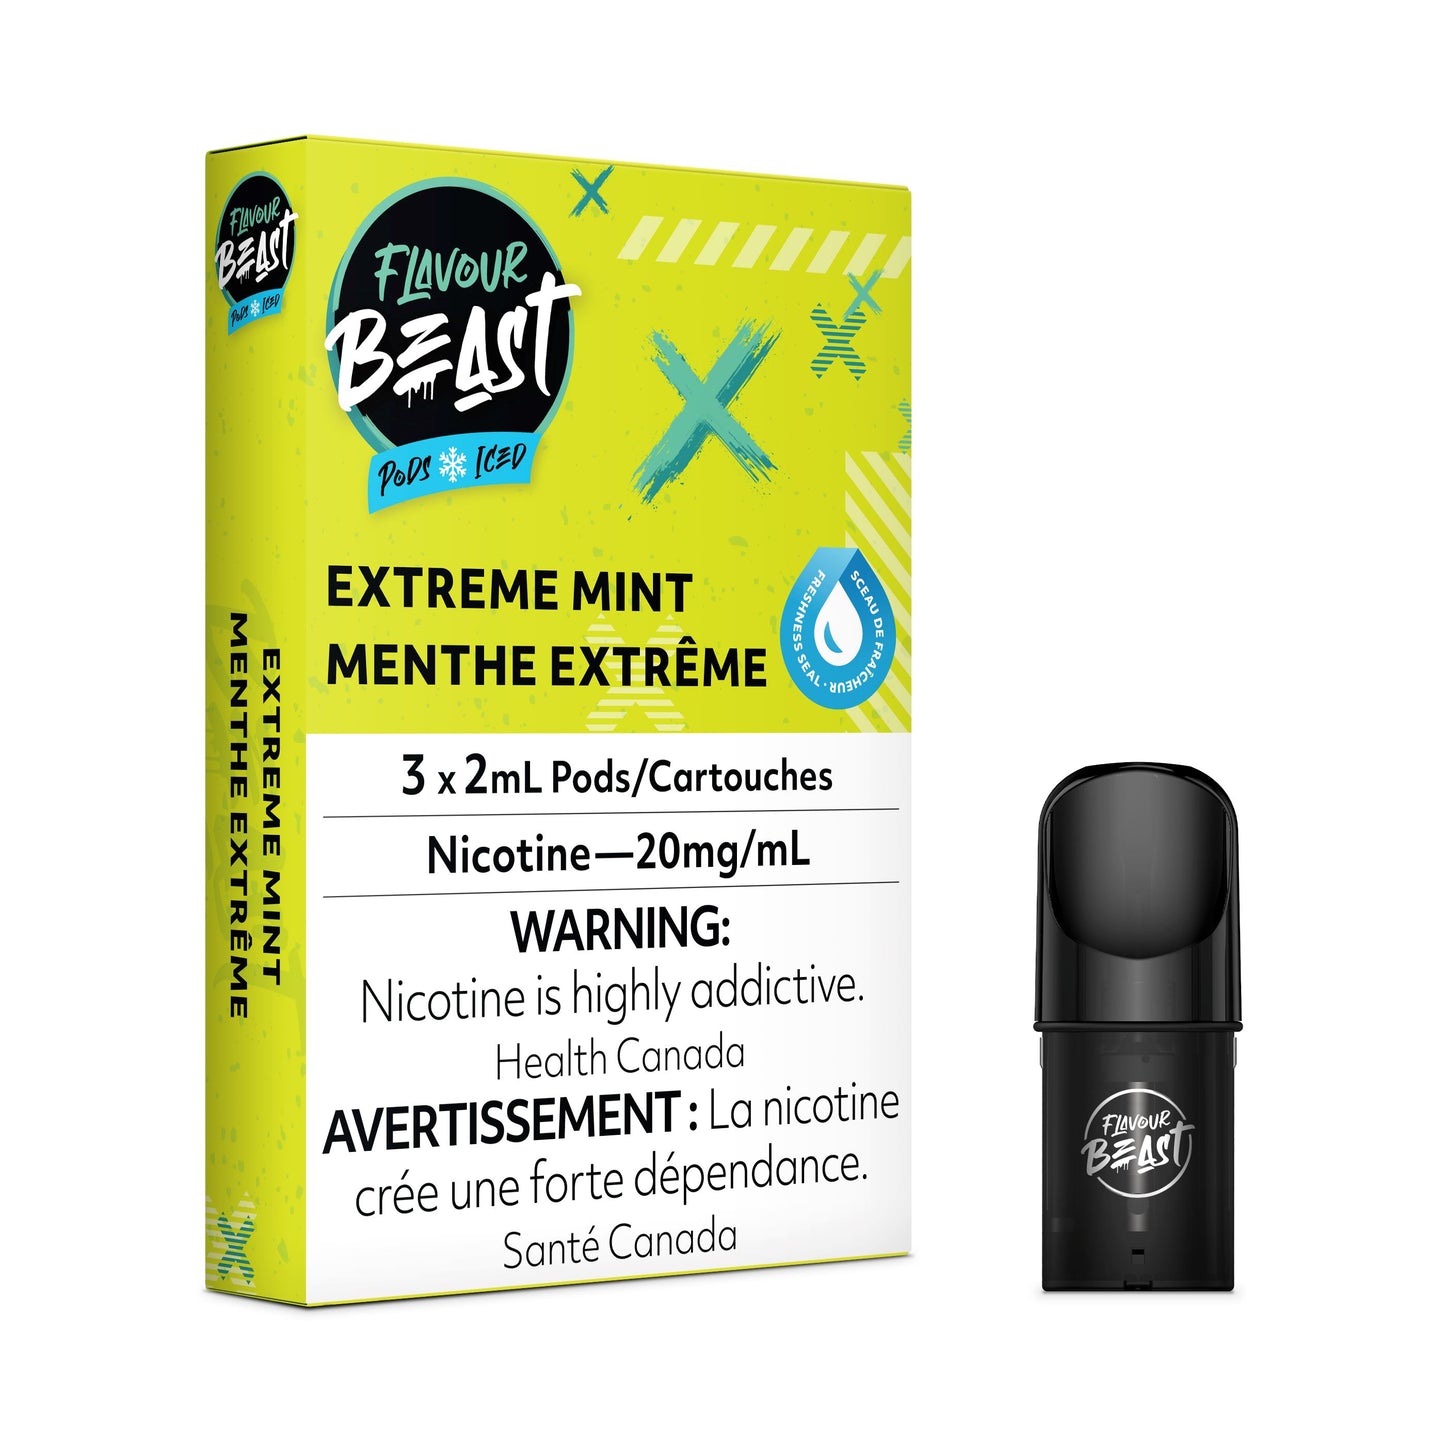 Extreme Mint Iced - FB CLOSED PODS Flavour Beast Flow 